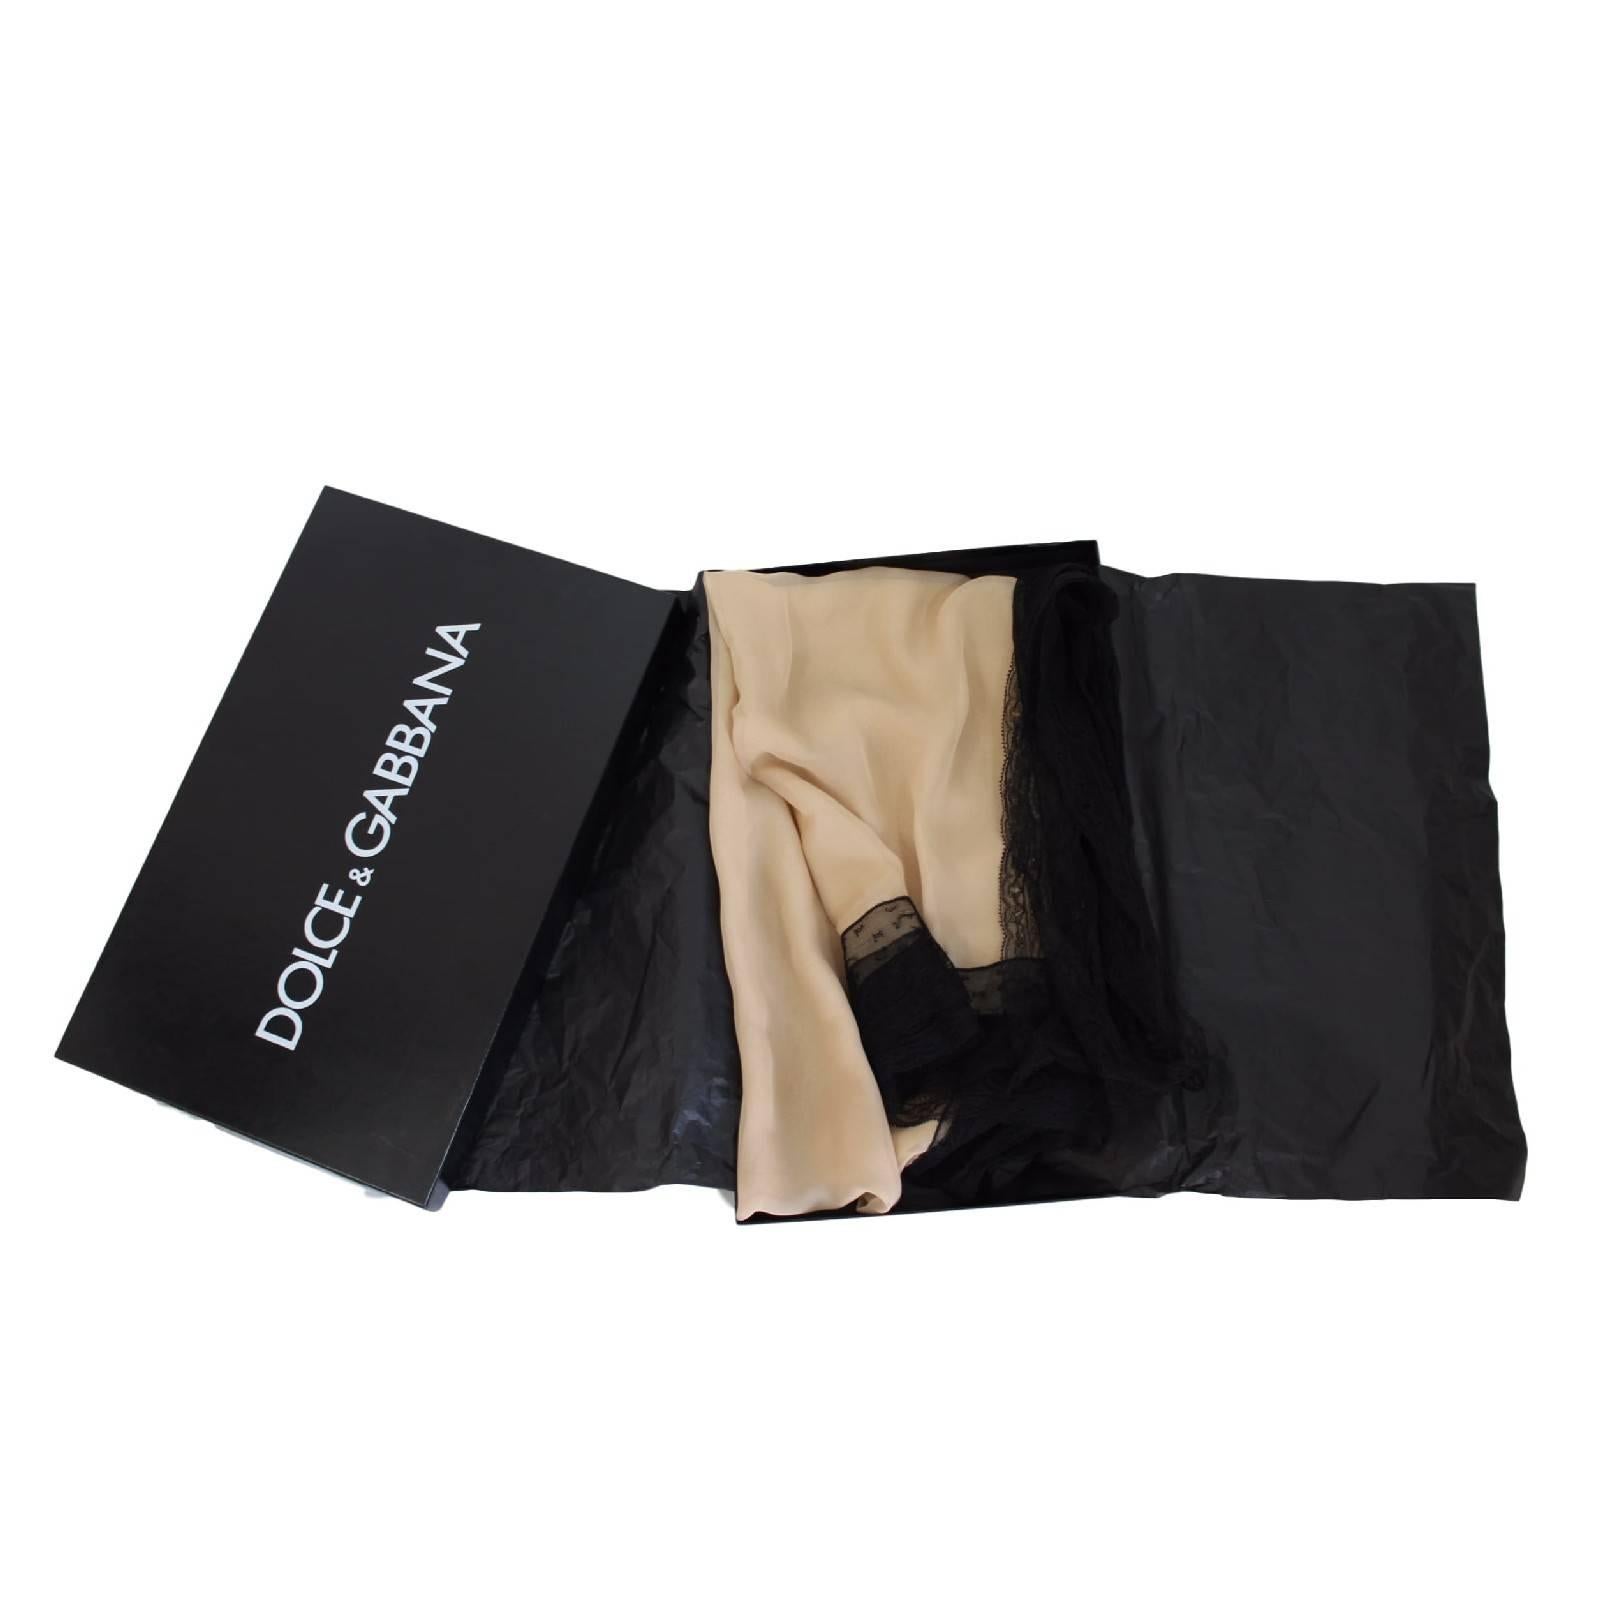 Dolce e Gabbana stole powder and black silk and lace with measures 175x64 cm, the scarf has its original box.

Measurements: 175 x 64 cm
Composition: 13% polyamide 80% silk 7% viscose
Condition: Excellent condition.
Color: black powder